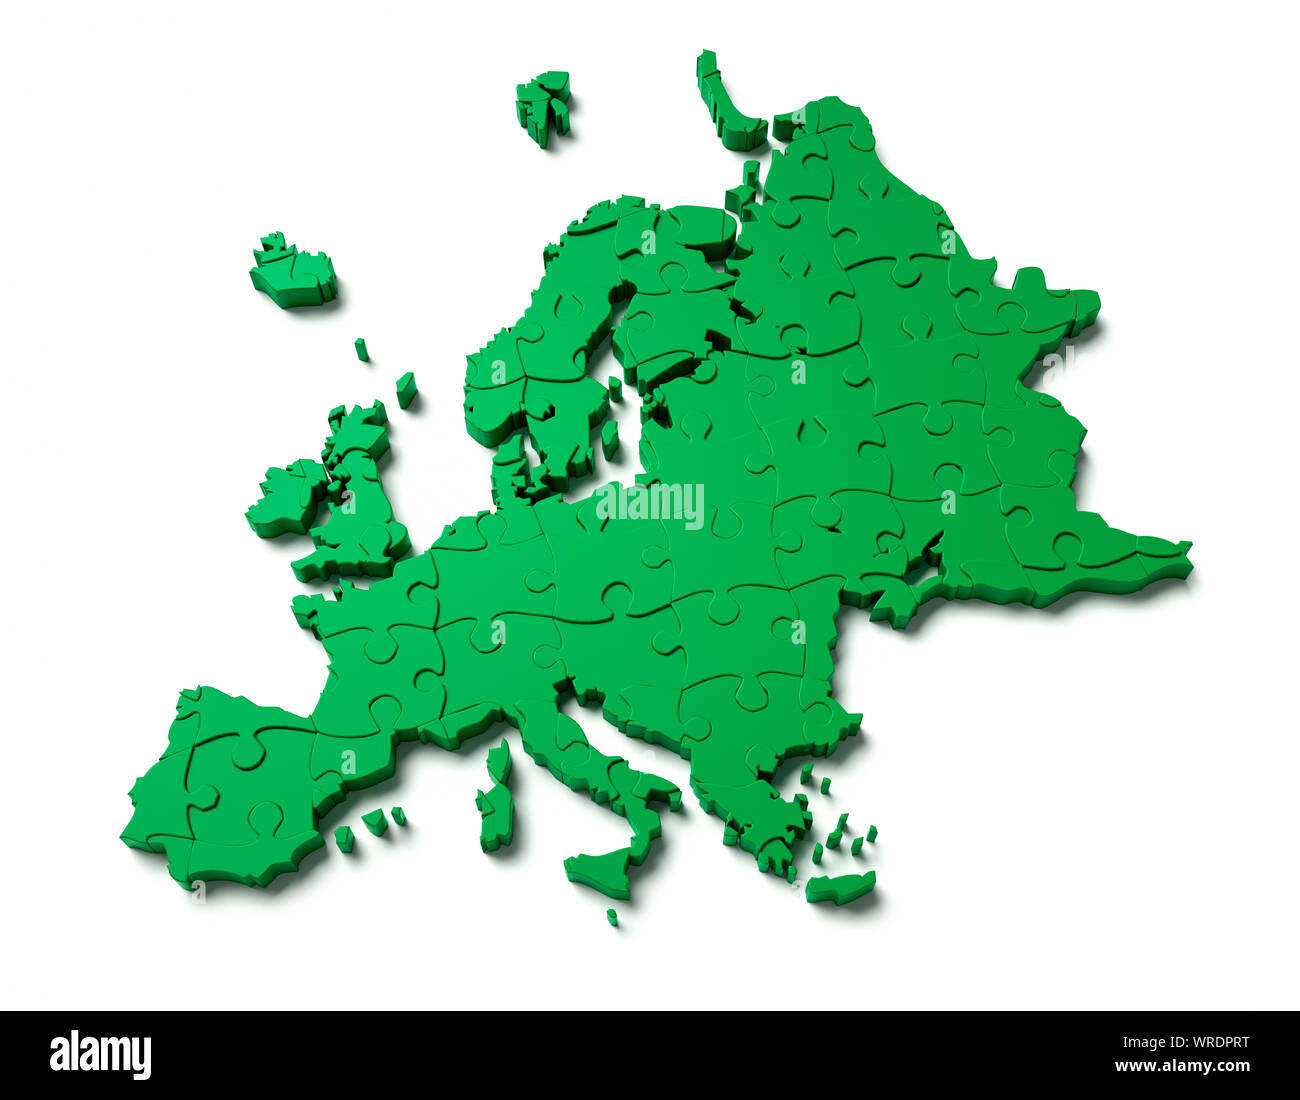 Continent of Europe as a green jigsaw puzzle Stock Photo